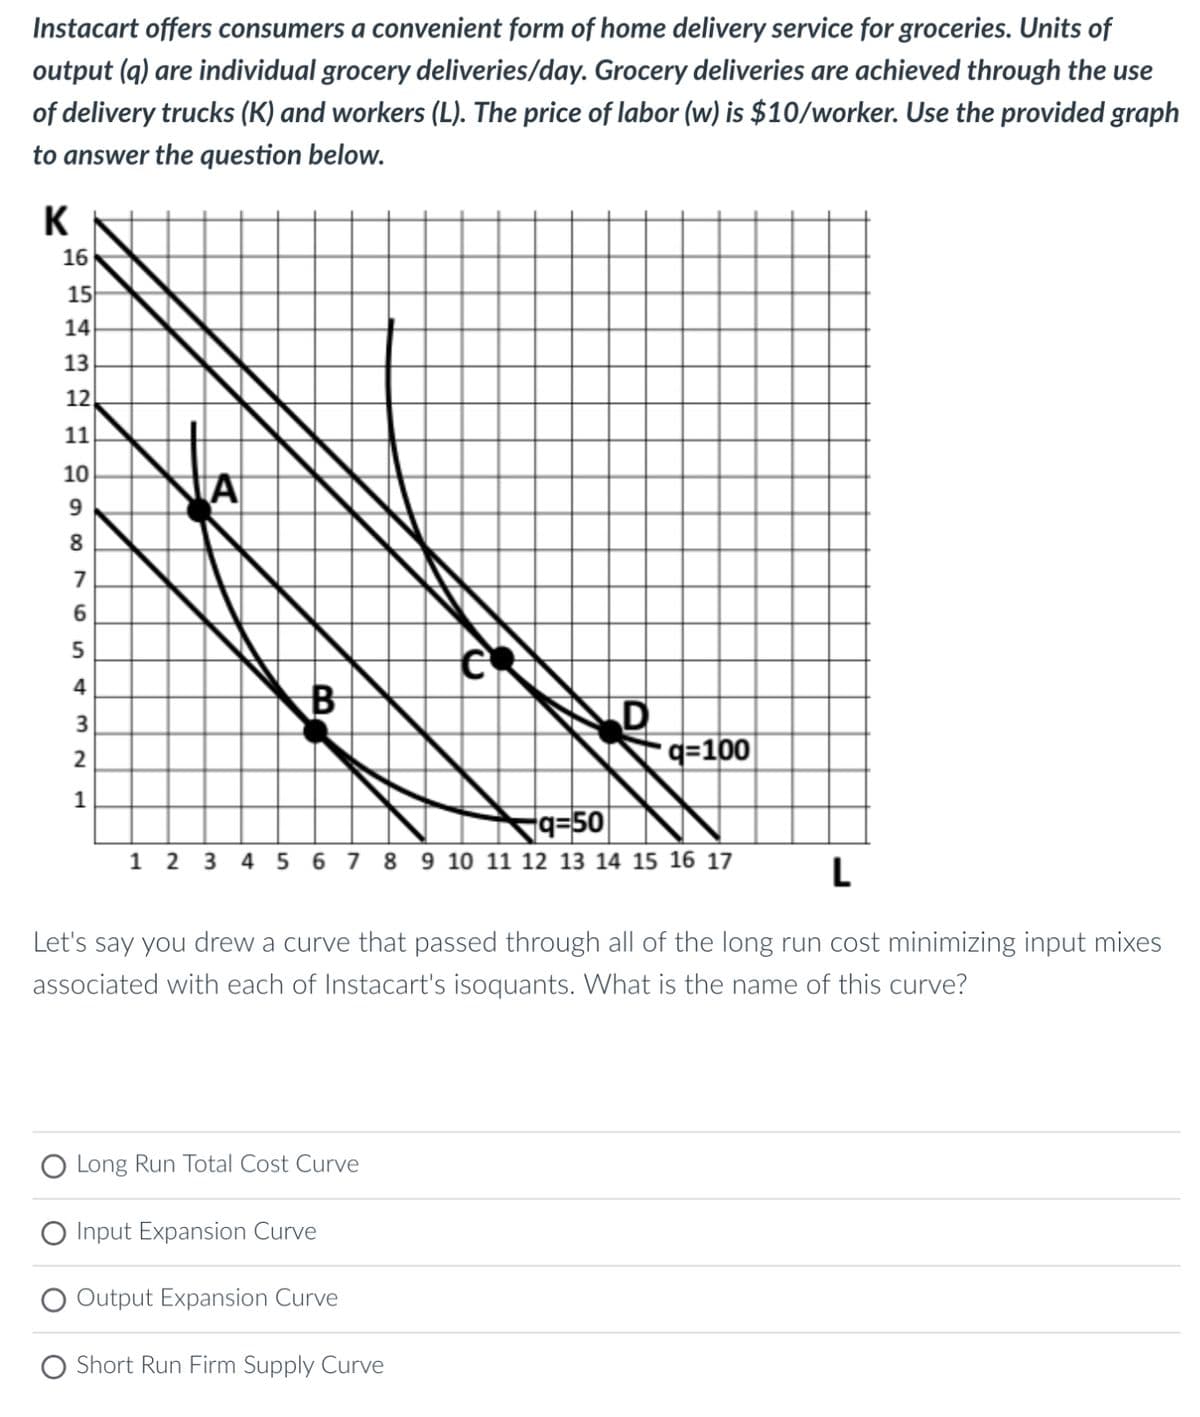 Instacart offers consumers a convenient form of home delivery service for groceries. Units of
output (q) are individual grocery deliveries/day. Grocery deliveries are achieved through the use
of delivery trucks (K) and workers (L). The price of labor (w) is $10/worker. Use the provided graph
to answer the question below.
K
16
15
14
13
12
11
10
9
8
7
6
5
4
32
1
A
B
q=50
1 2 3 4 5 6 7 8 9 10 11 12 13 14 15 16 17
Long Run Total Cost Curve
L
Let's say you drew a curve that passed through all of the long run cost minimizing input mixes
associated with each of Instacart's isoquants. What is the name of this curve?
O Input Expansion Curve
C
Output Expansion Curve
q=100
O Short Run Firm Supply Curve